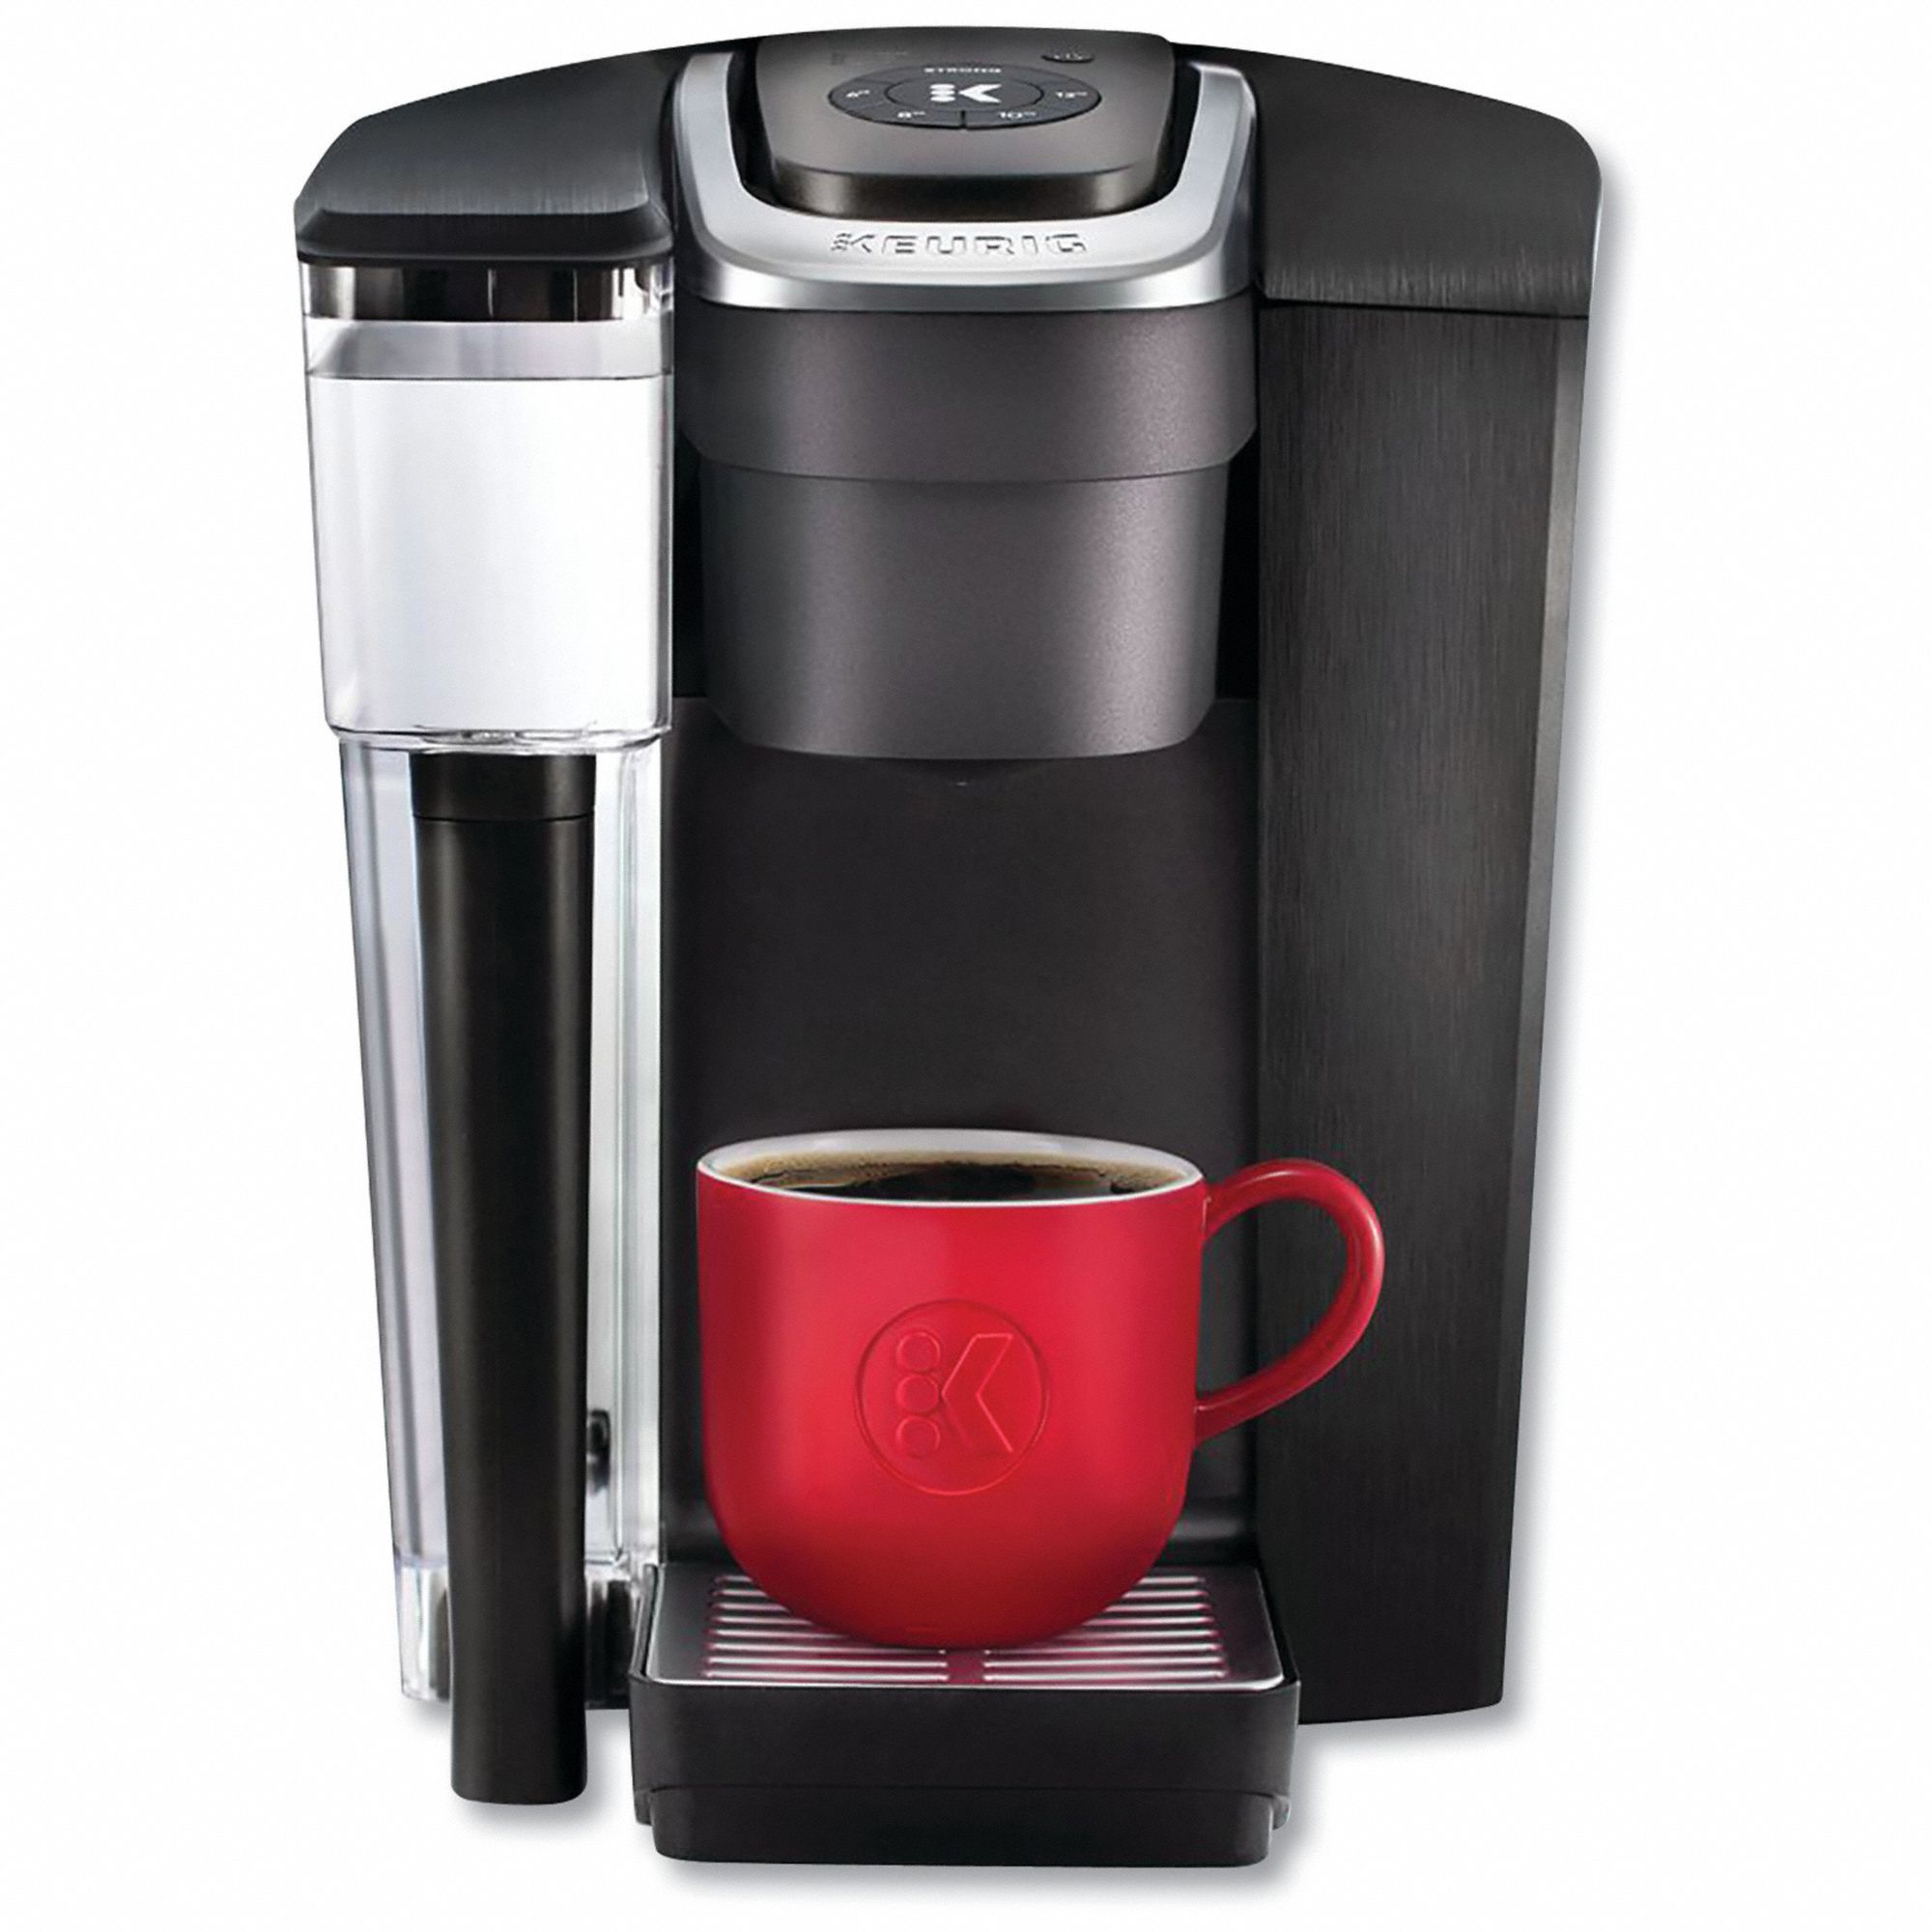 Coffee Brewer: 96 oz Max Brewing Capacity, Black, 12 3/8 in x 10 1/4 in x 12 1/8 in